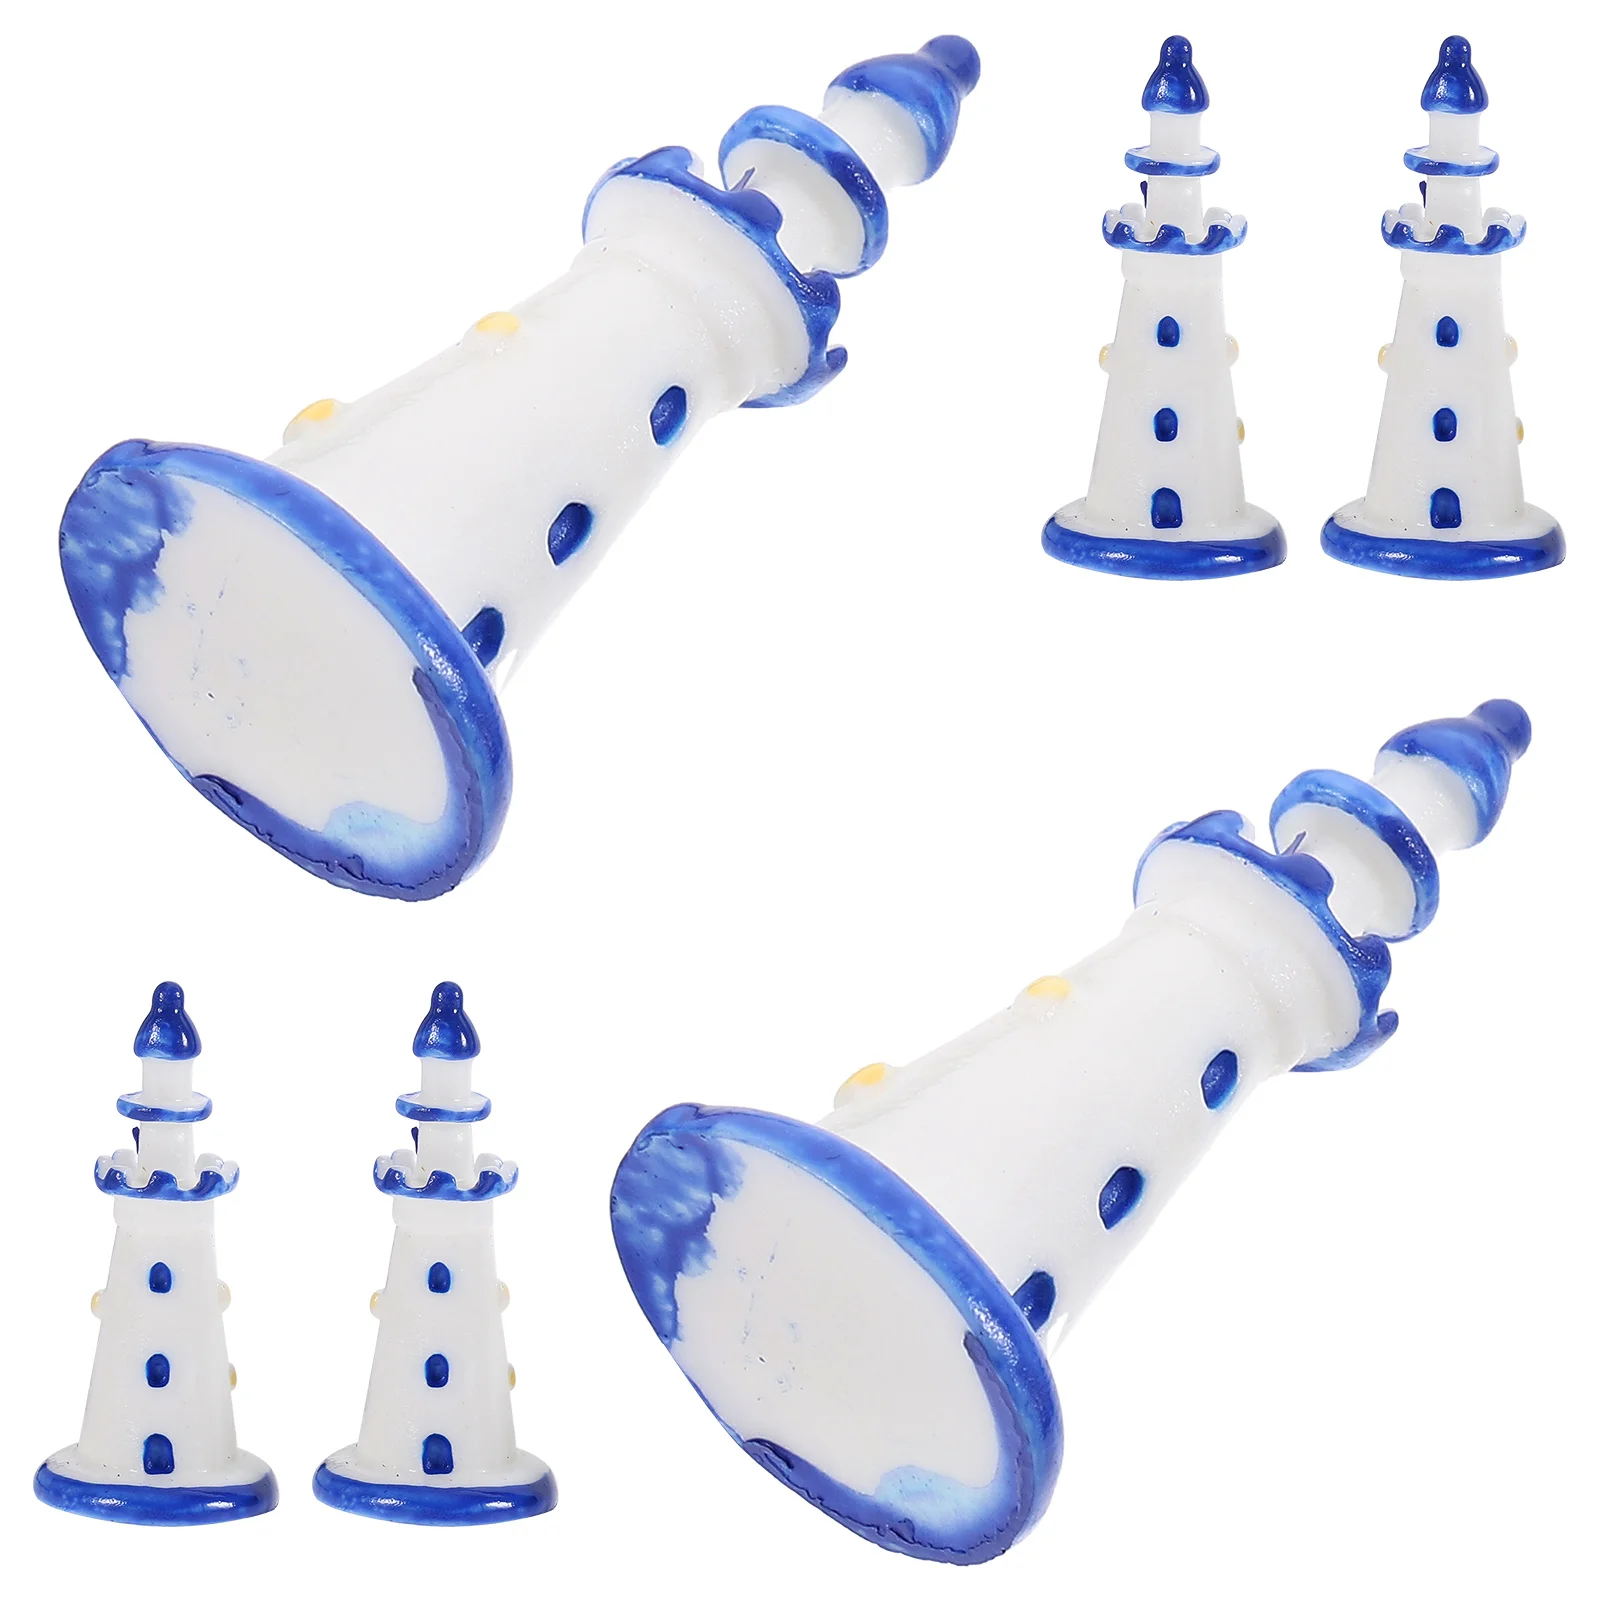 10 Pcs Household Mini Lighthouse Home Decor Scenery Decorations Resin Photography Props newborn baby photography props toy story theme set outfits dolls blanket posing sofa decorations blanket studio shoot photo prop